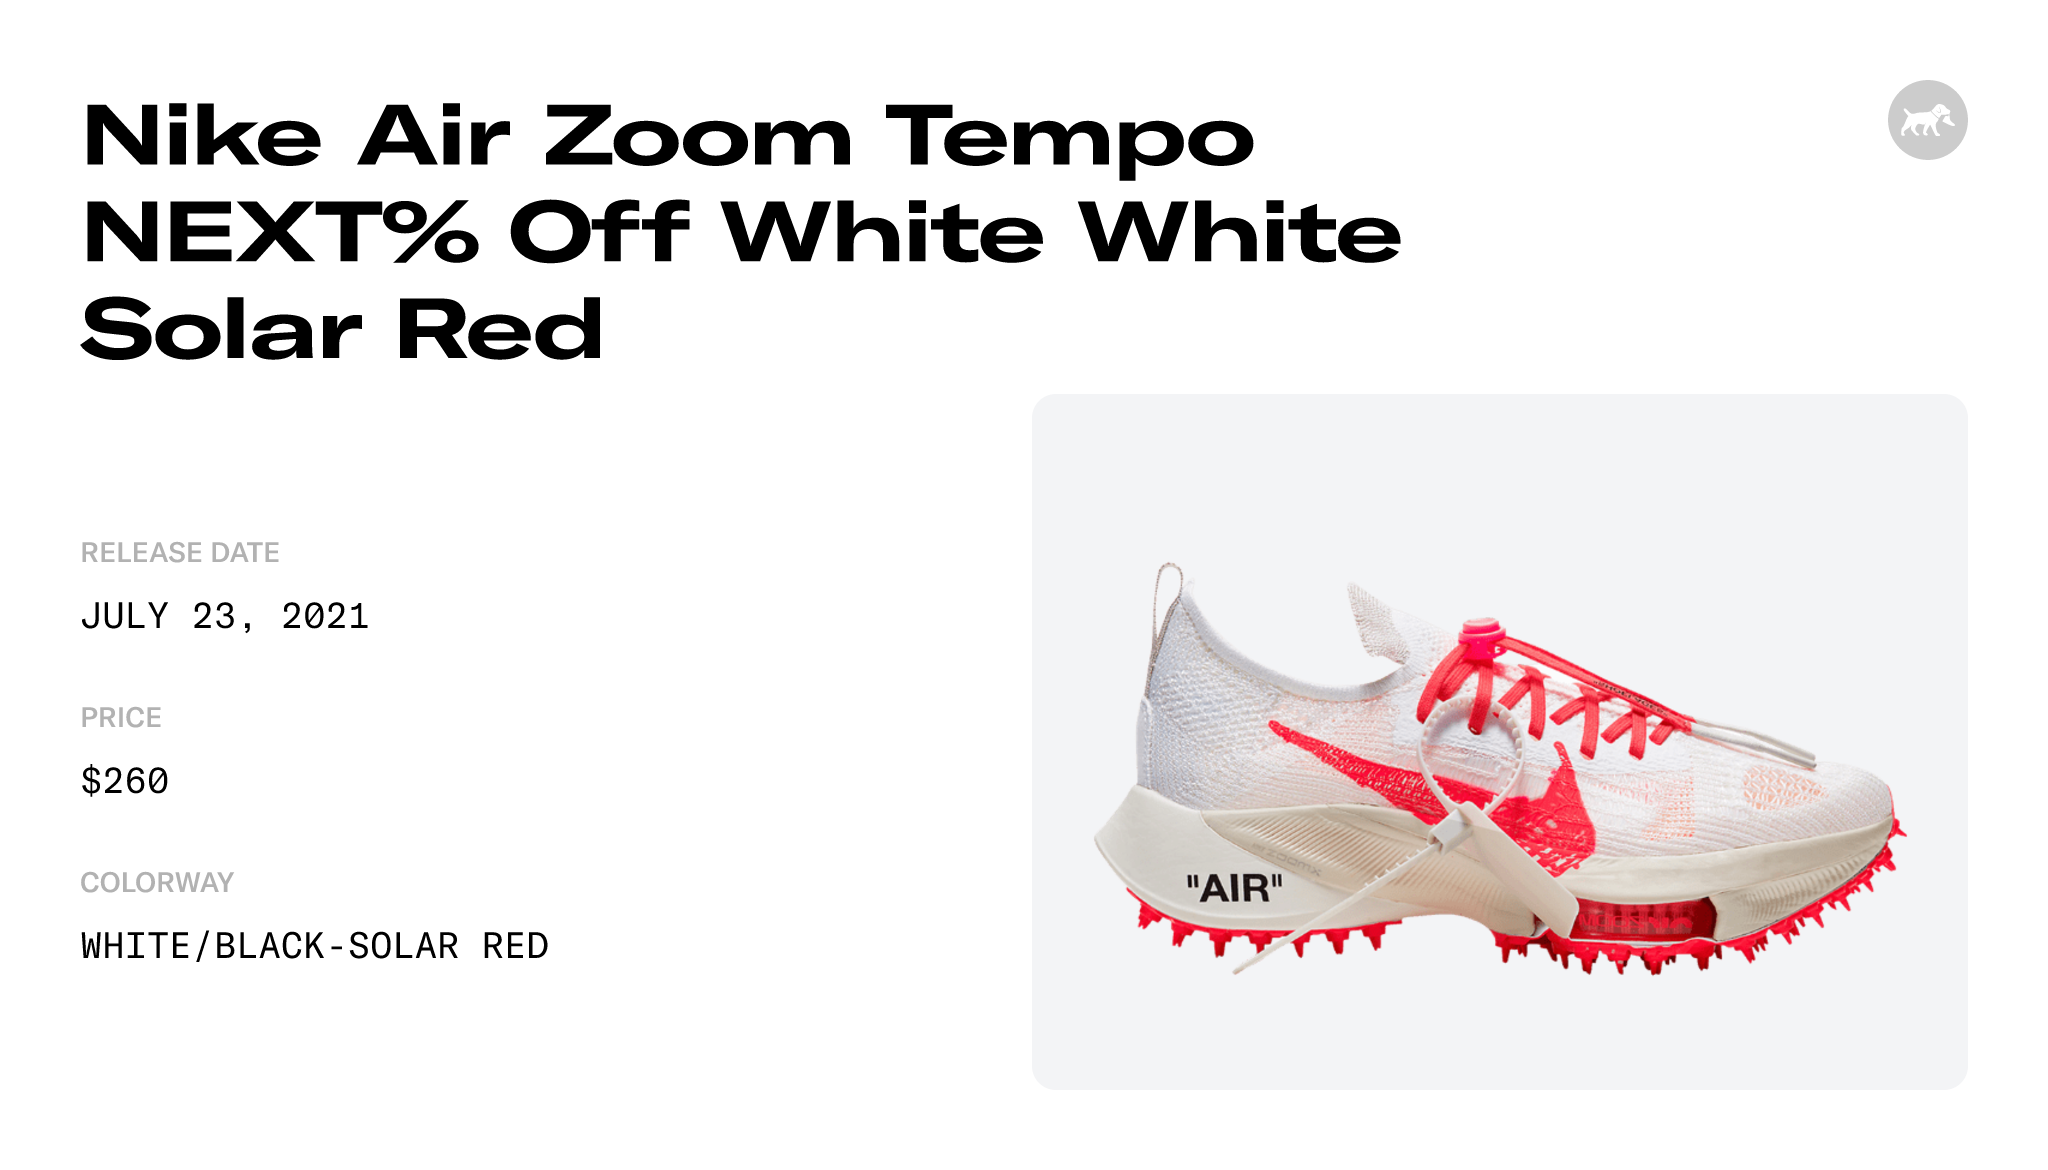 Nike Air Zoom Tempo NEXT% Off White White Solar Red - CV0697-100 Raffles  and Release Date